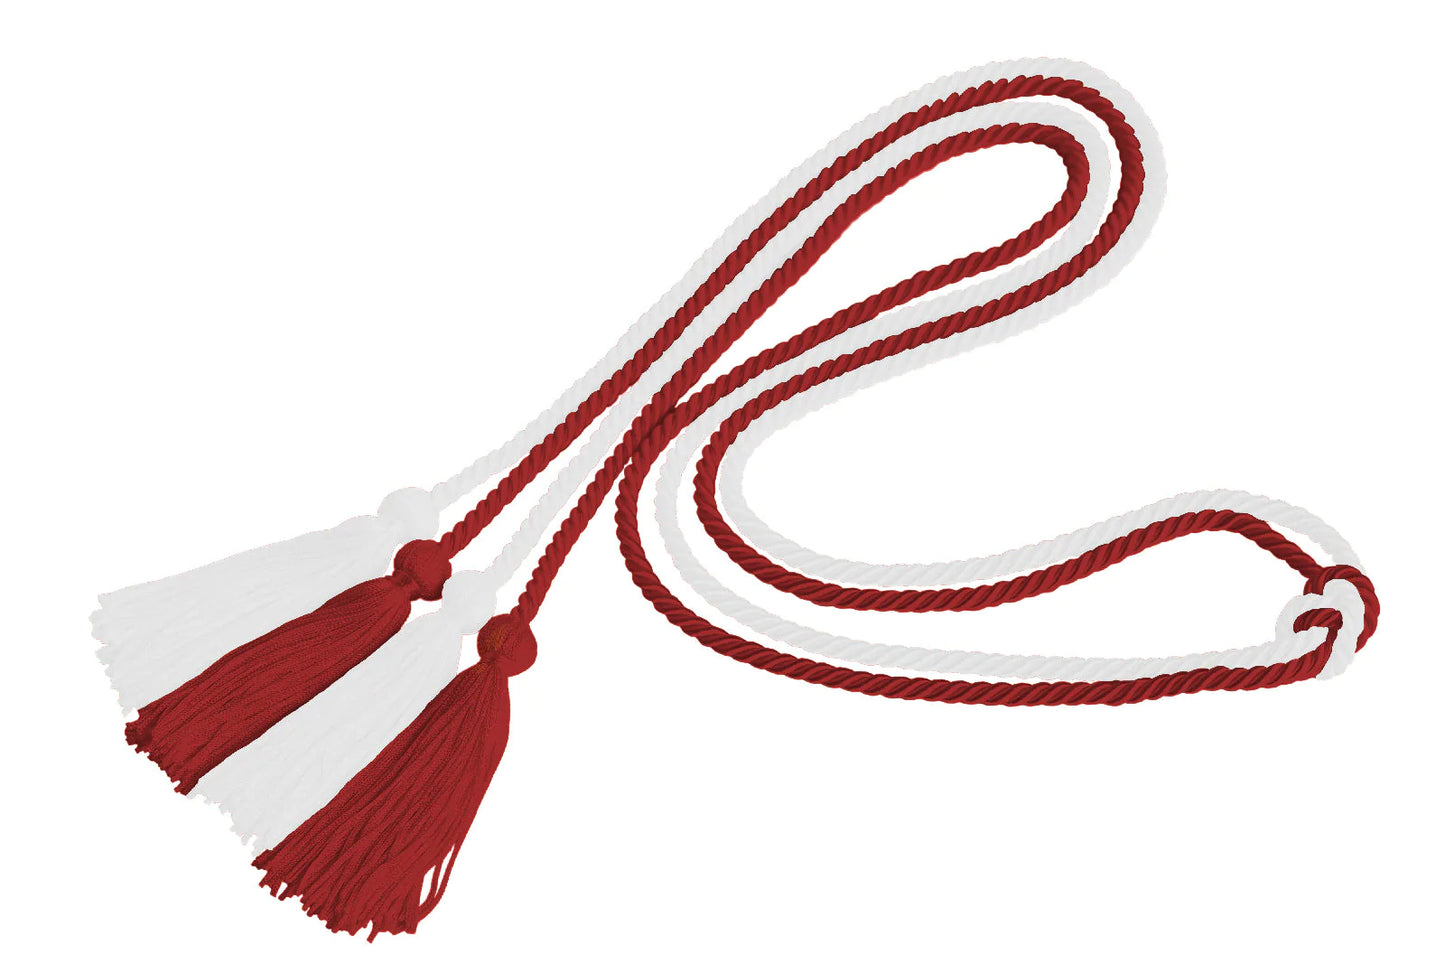 Greek Graduation Cords - Sorority and Fraternity Honor Cords